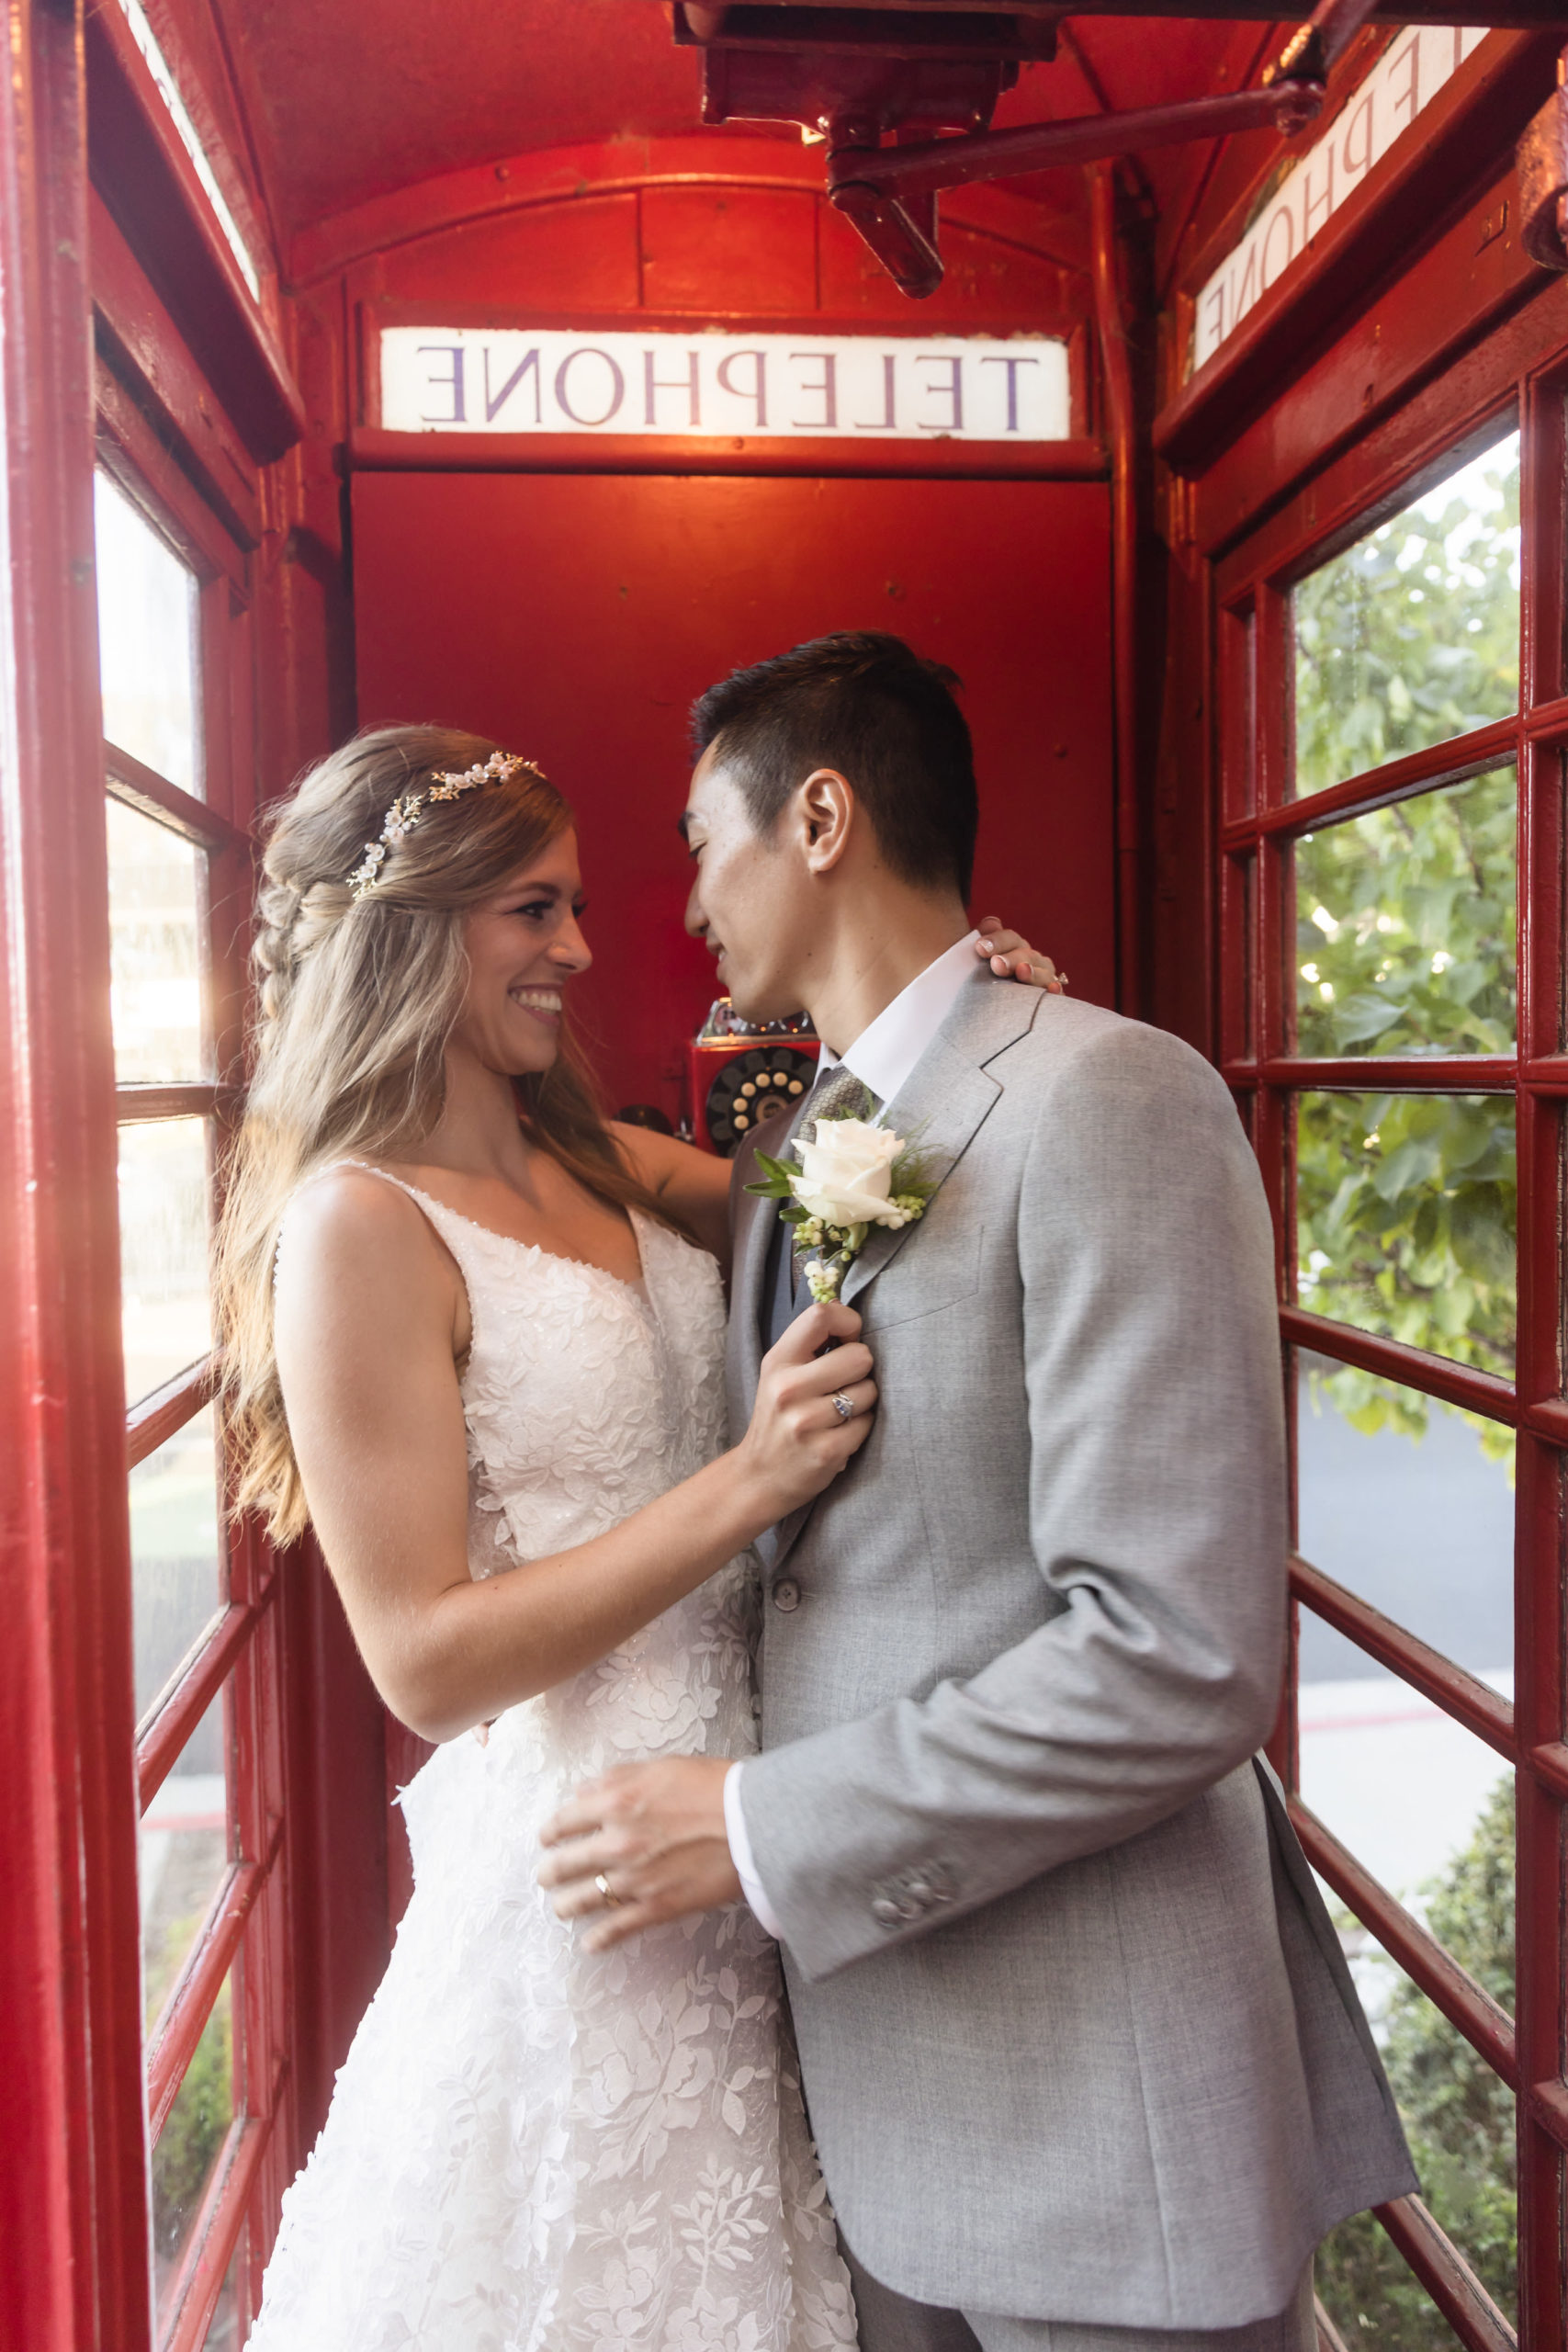 The Ultimate Wedding Guide For Five Crowns In Corona Del Mar. Couple posing inside red telephone booth.